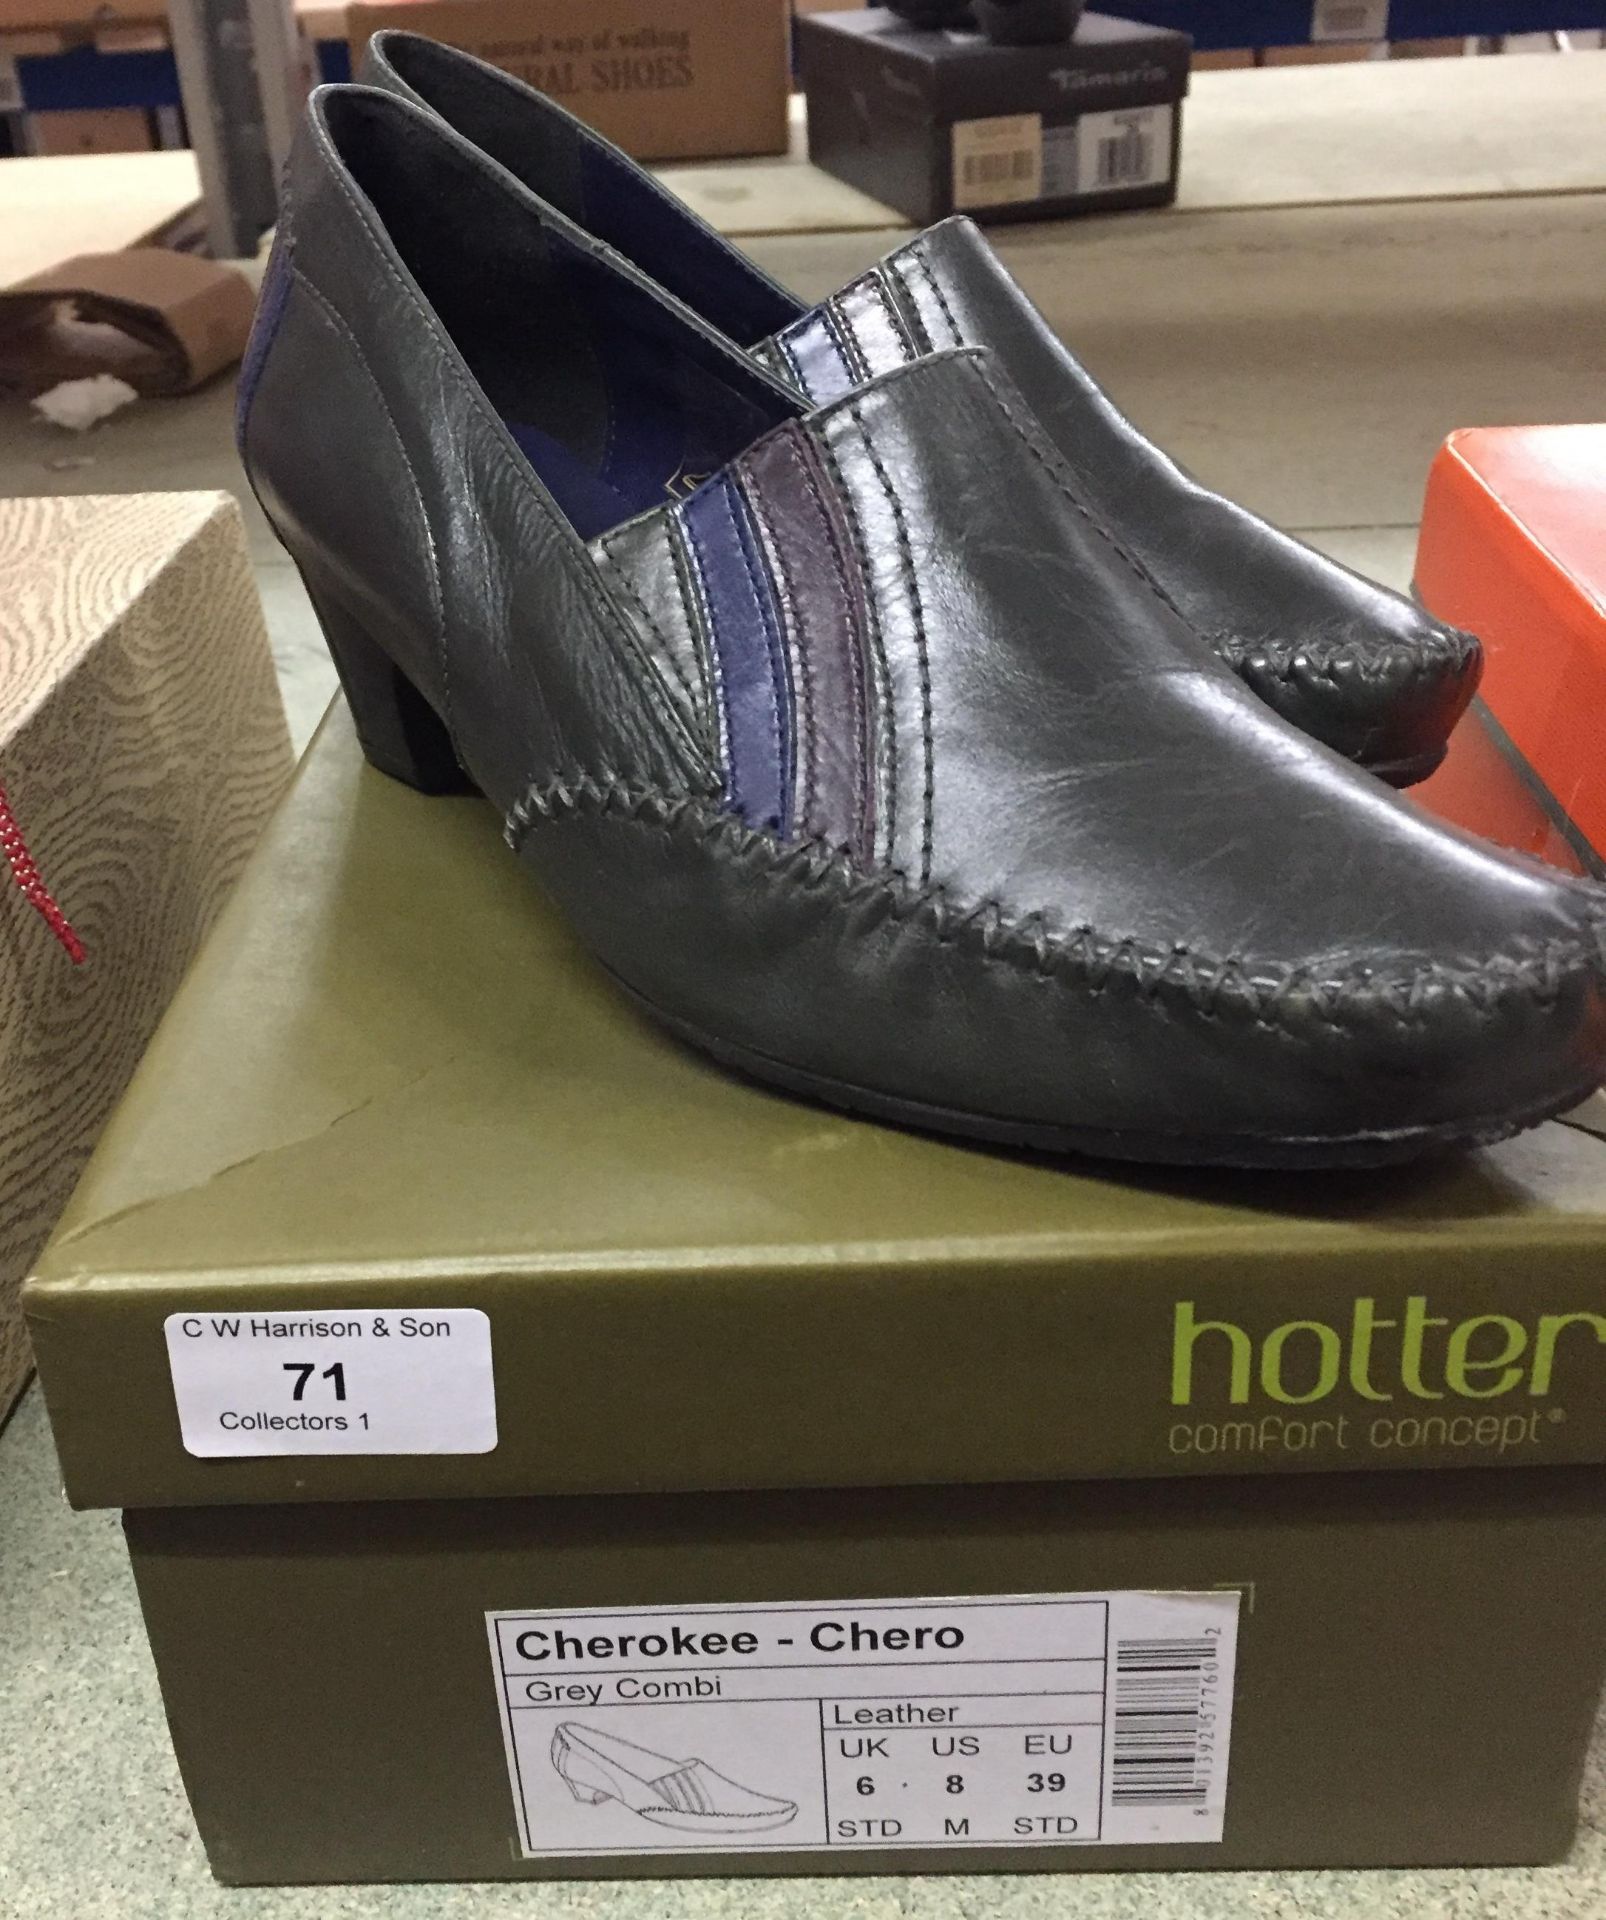 Pair of Hotter ladies Cherokee grey combi leather shoes (size 6)